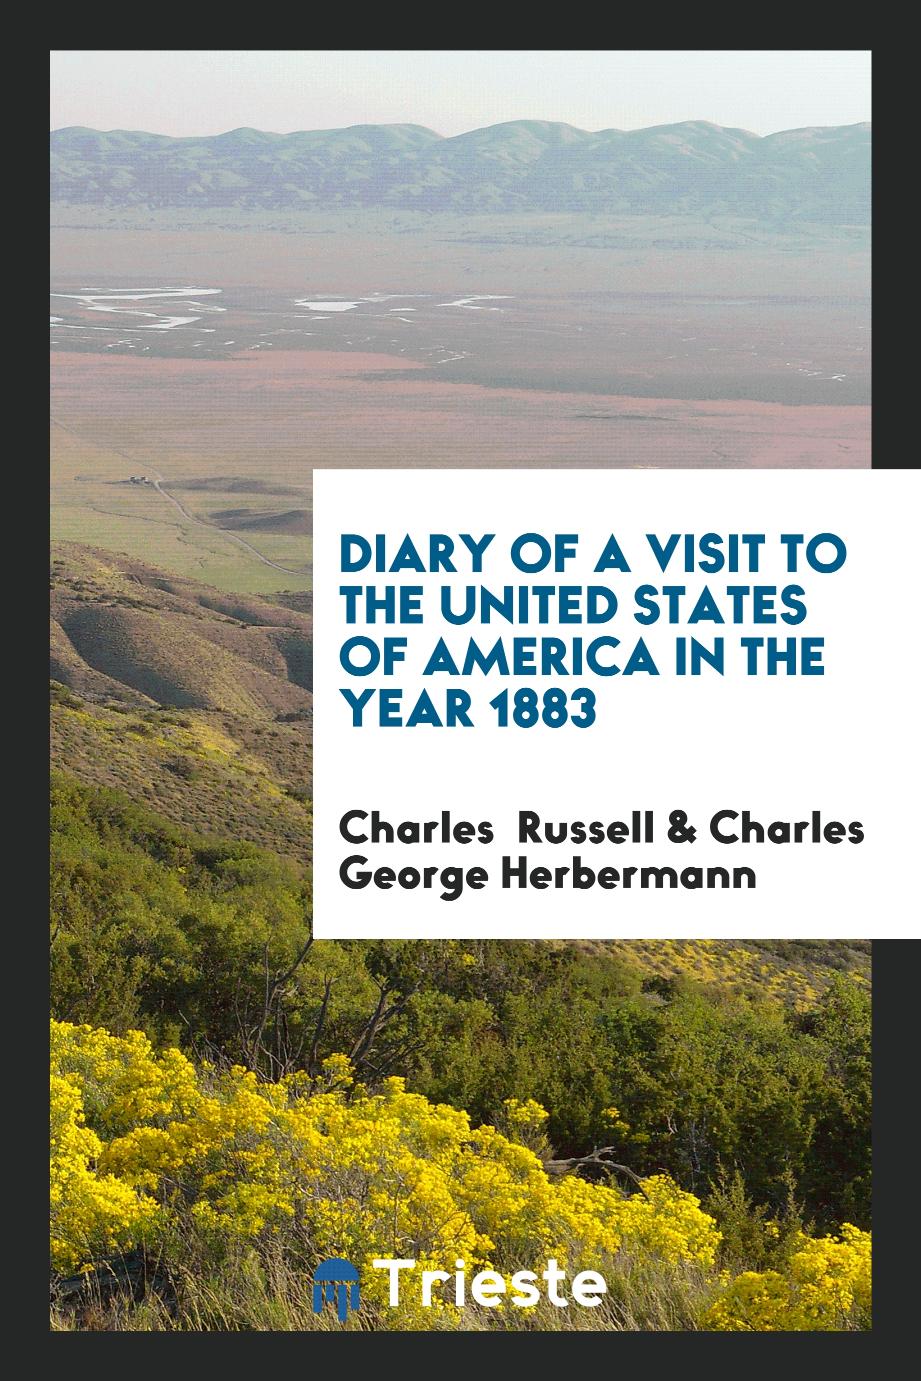 Diary of a visit to the United States of America in the year 1883